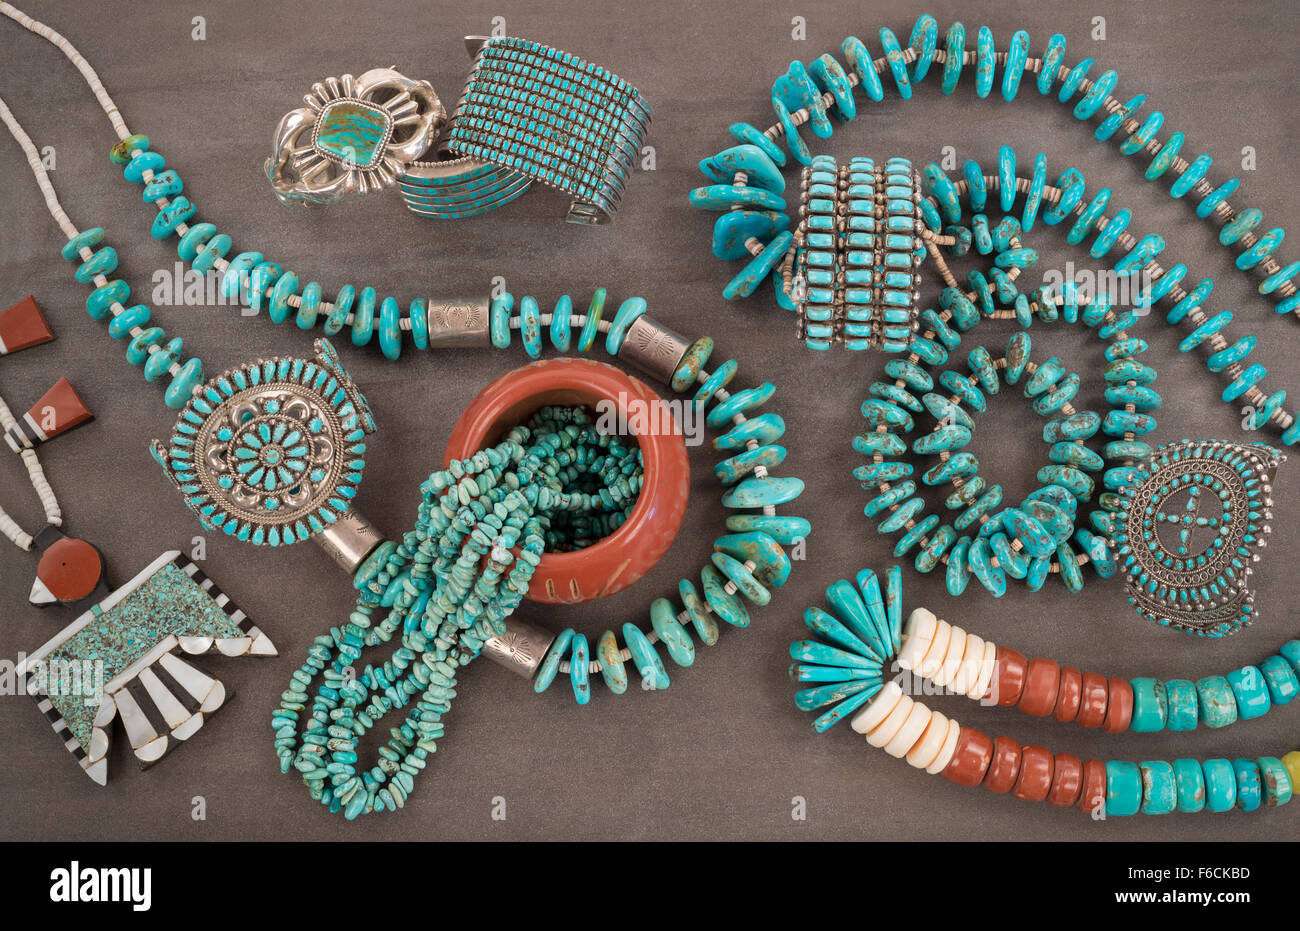 A collection of Vintage Zuni and Navajo Native American Jewelry made of turquoise, silver, pipe stone and Heishe beads. Stock Photo